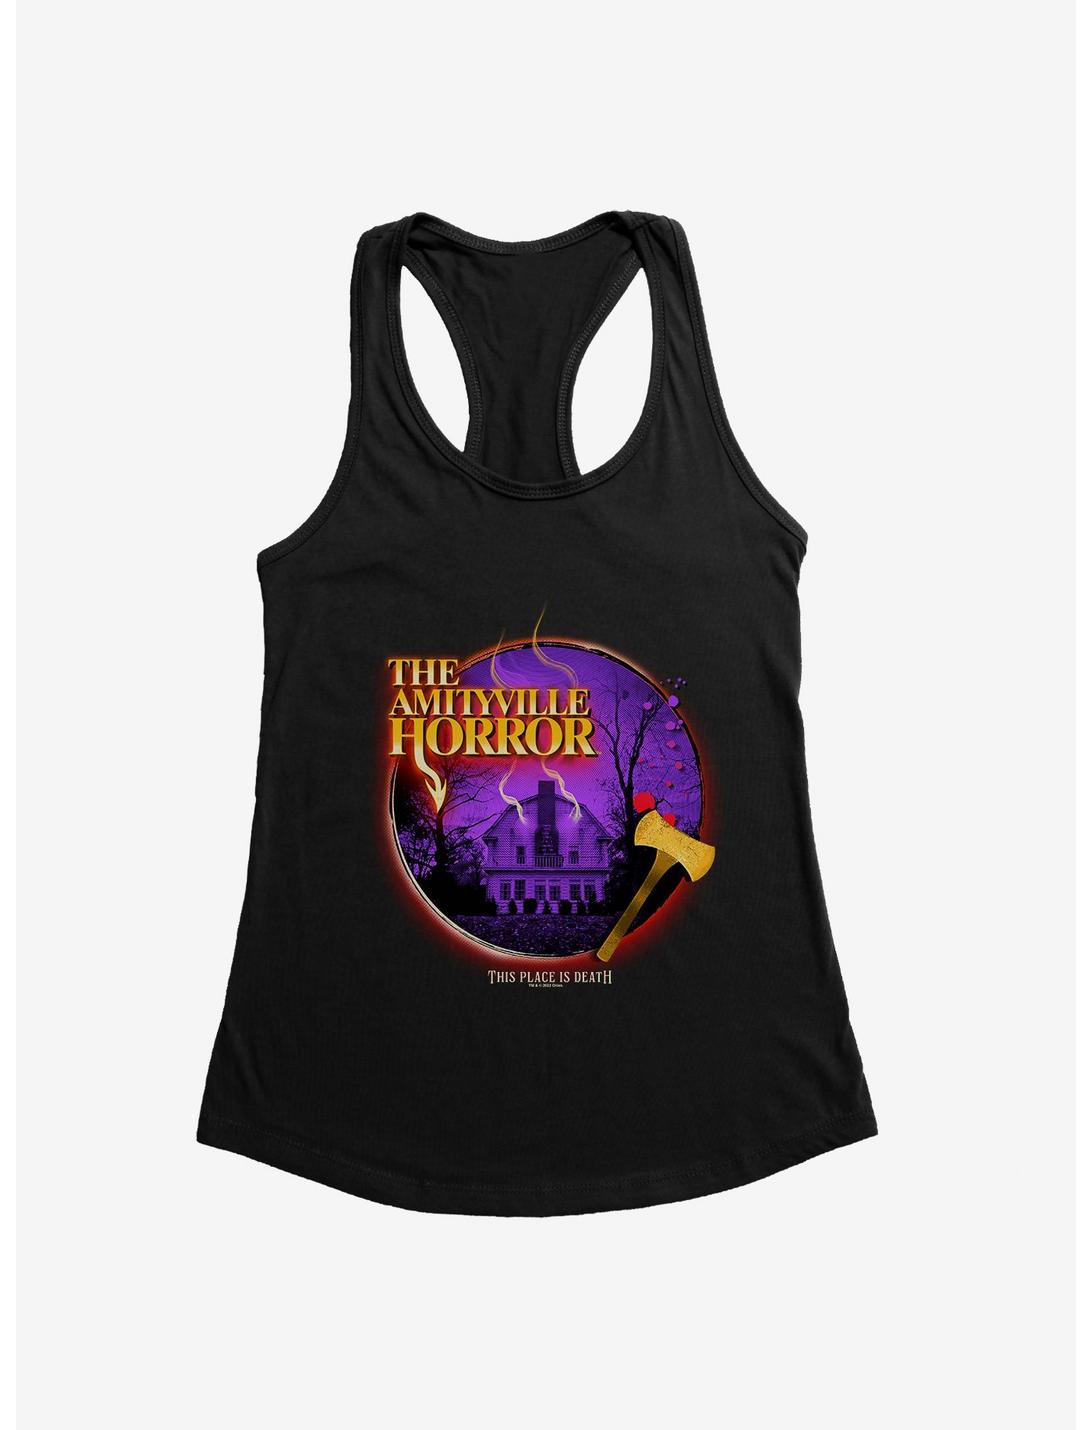 The Amityville Horror This Place Is Death Girls Tank, BLACK, hi-res